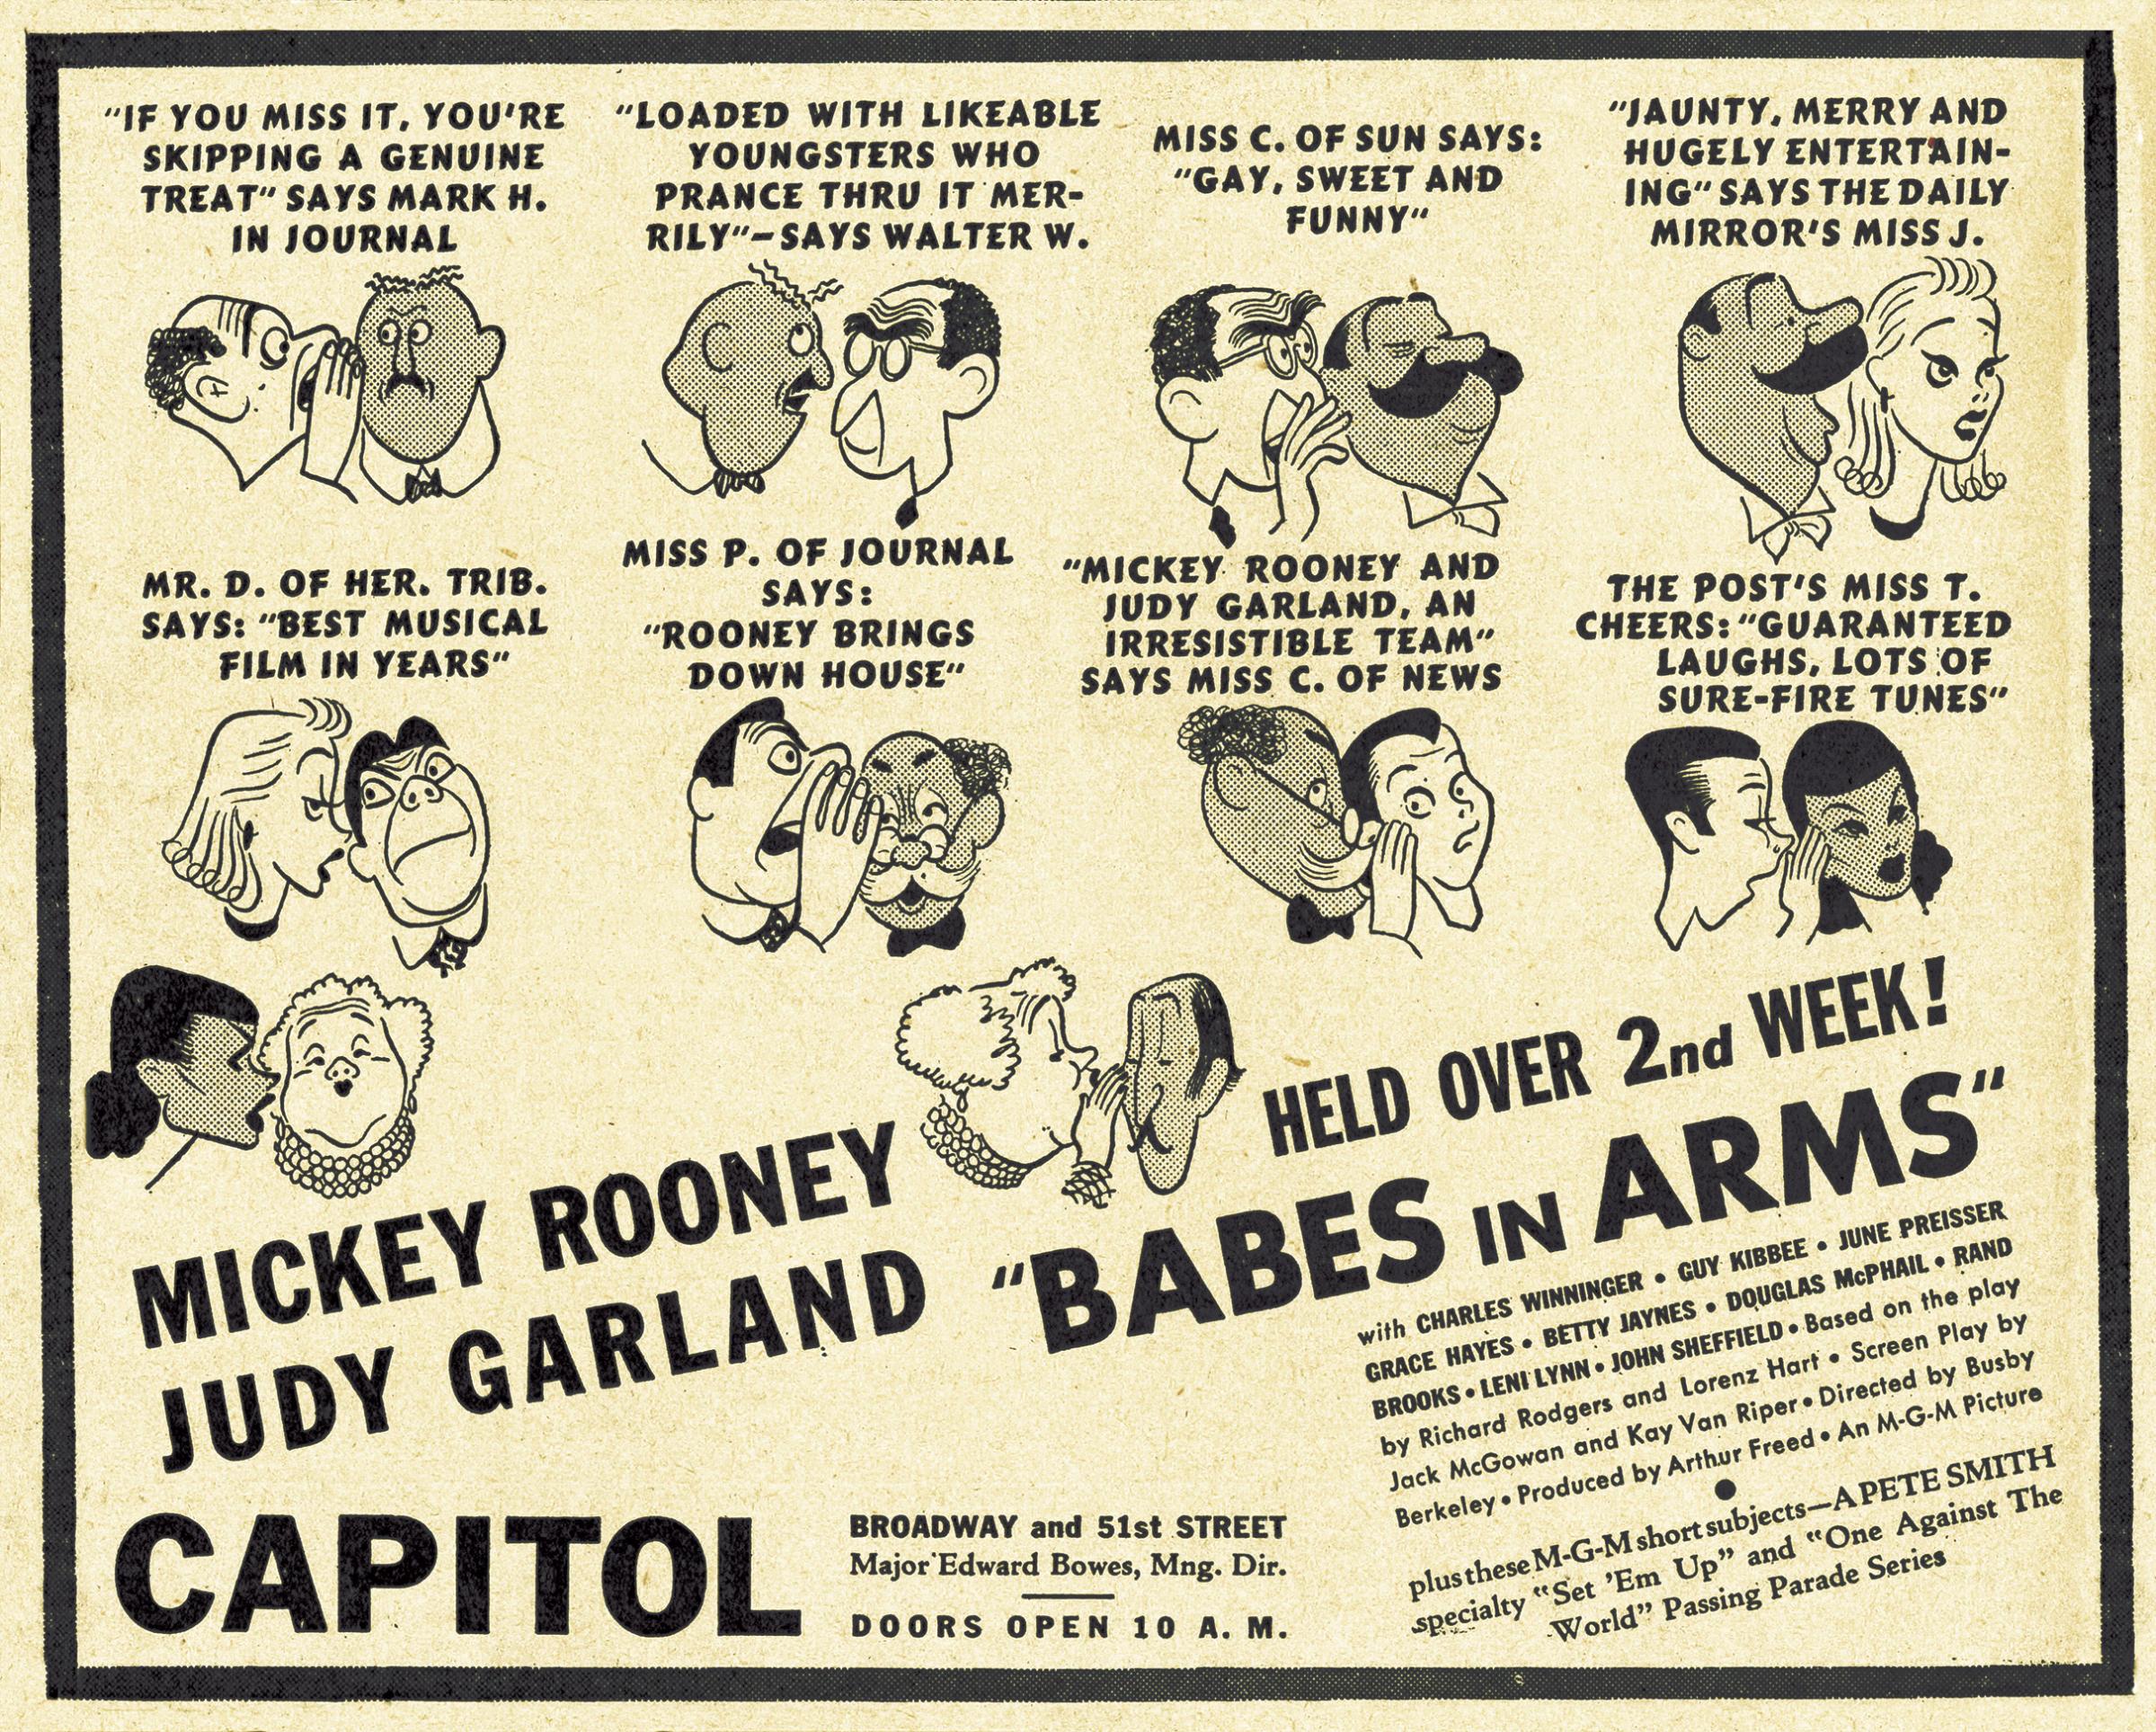 Babes iArms newspaper advertisement, 1939.